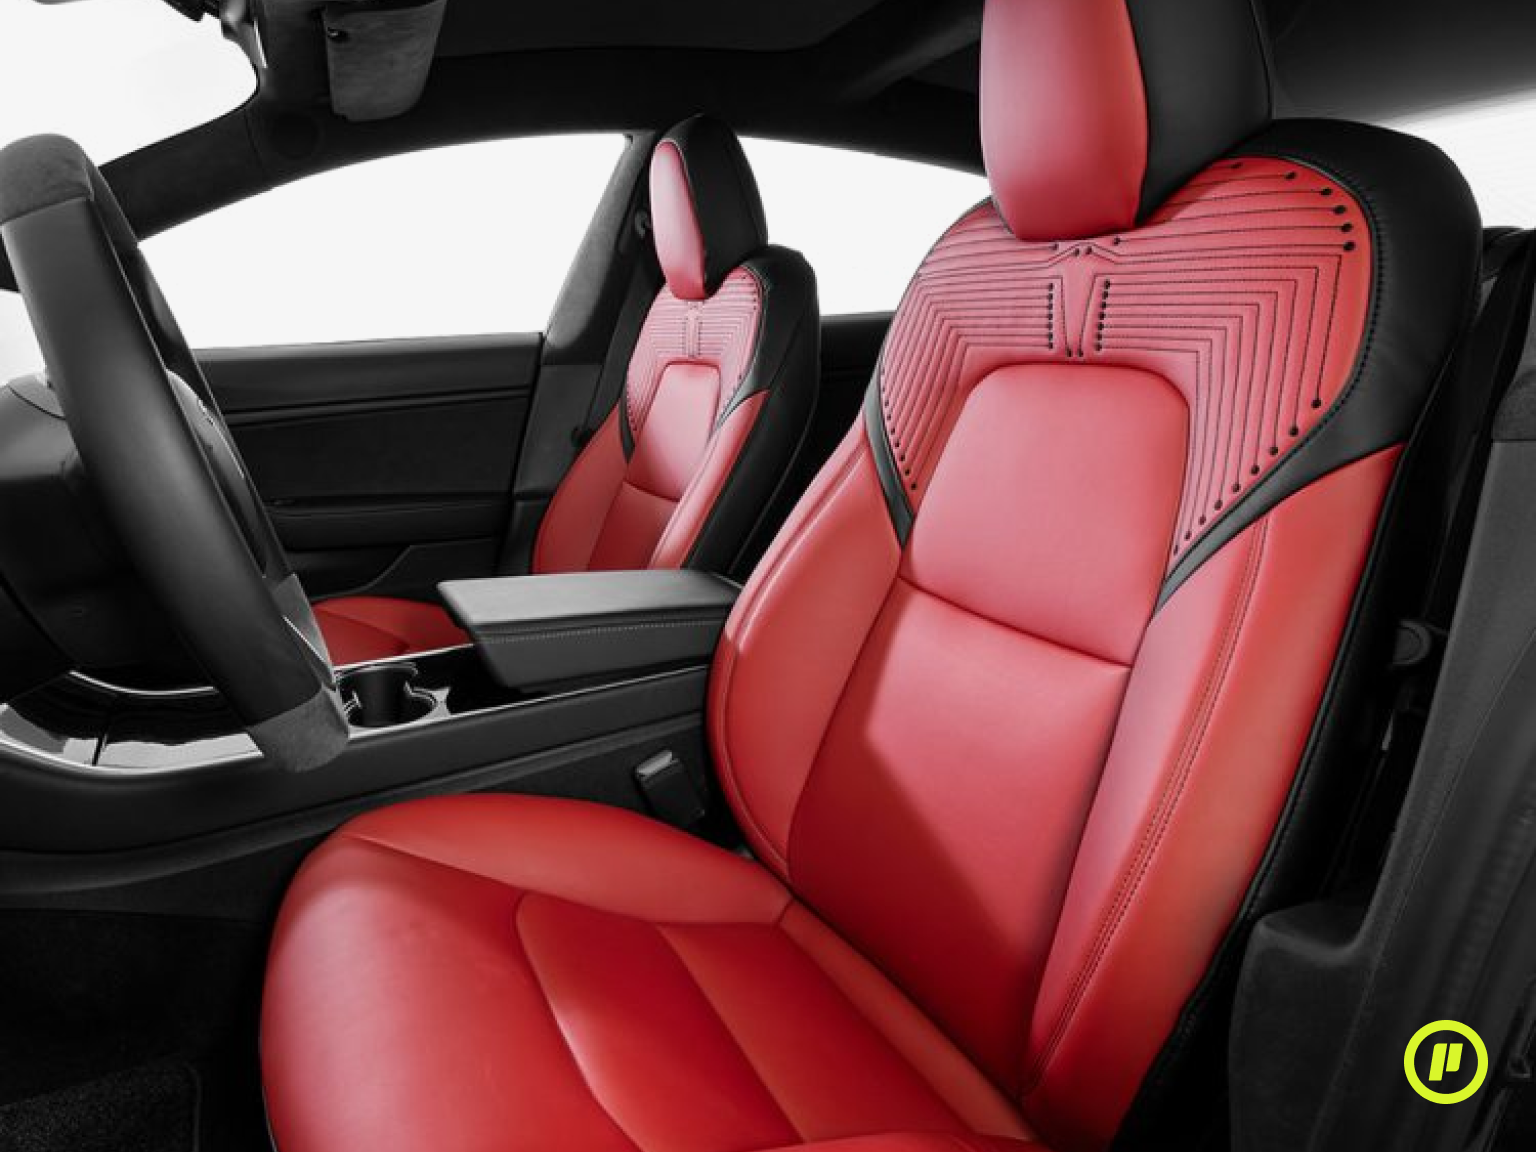 Startech - Seat Covers made of Vegan Leather for Tesla Model 3 (2017+)